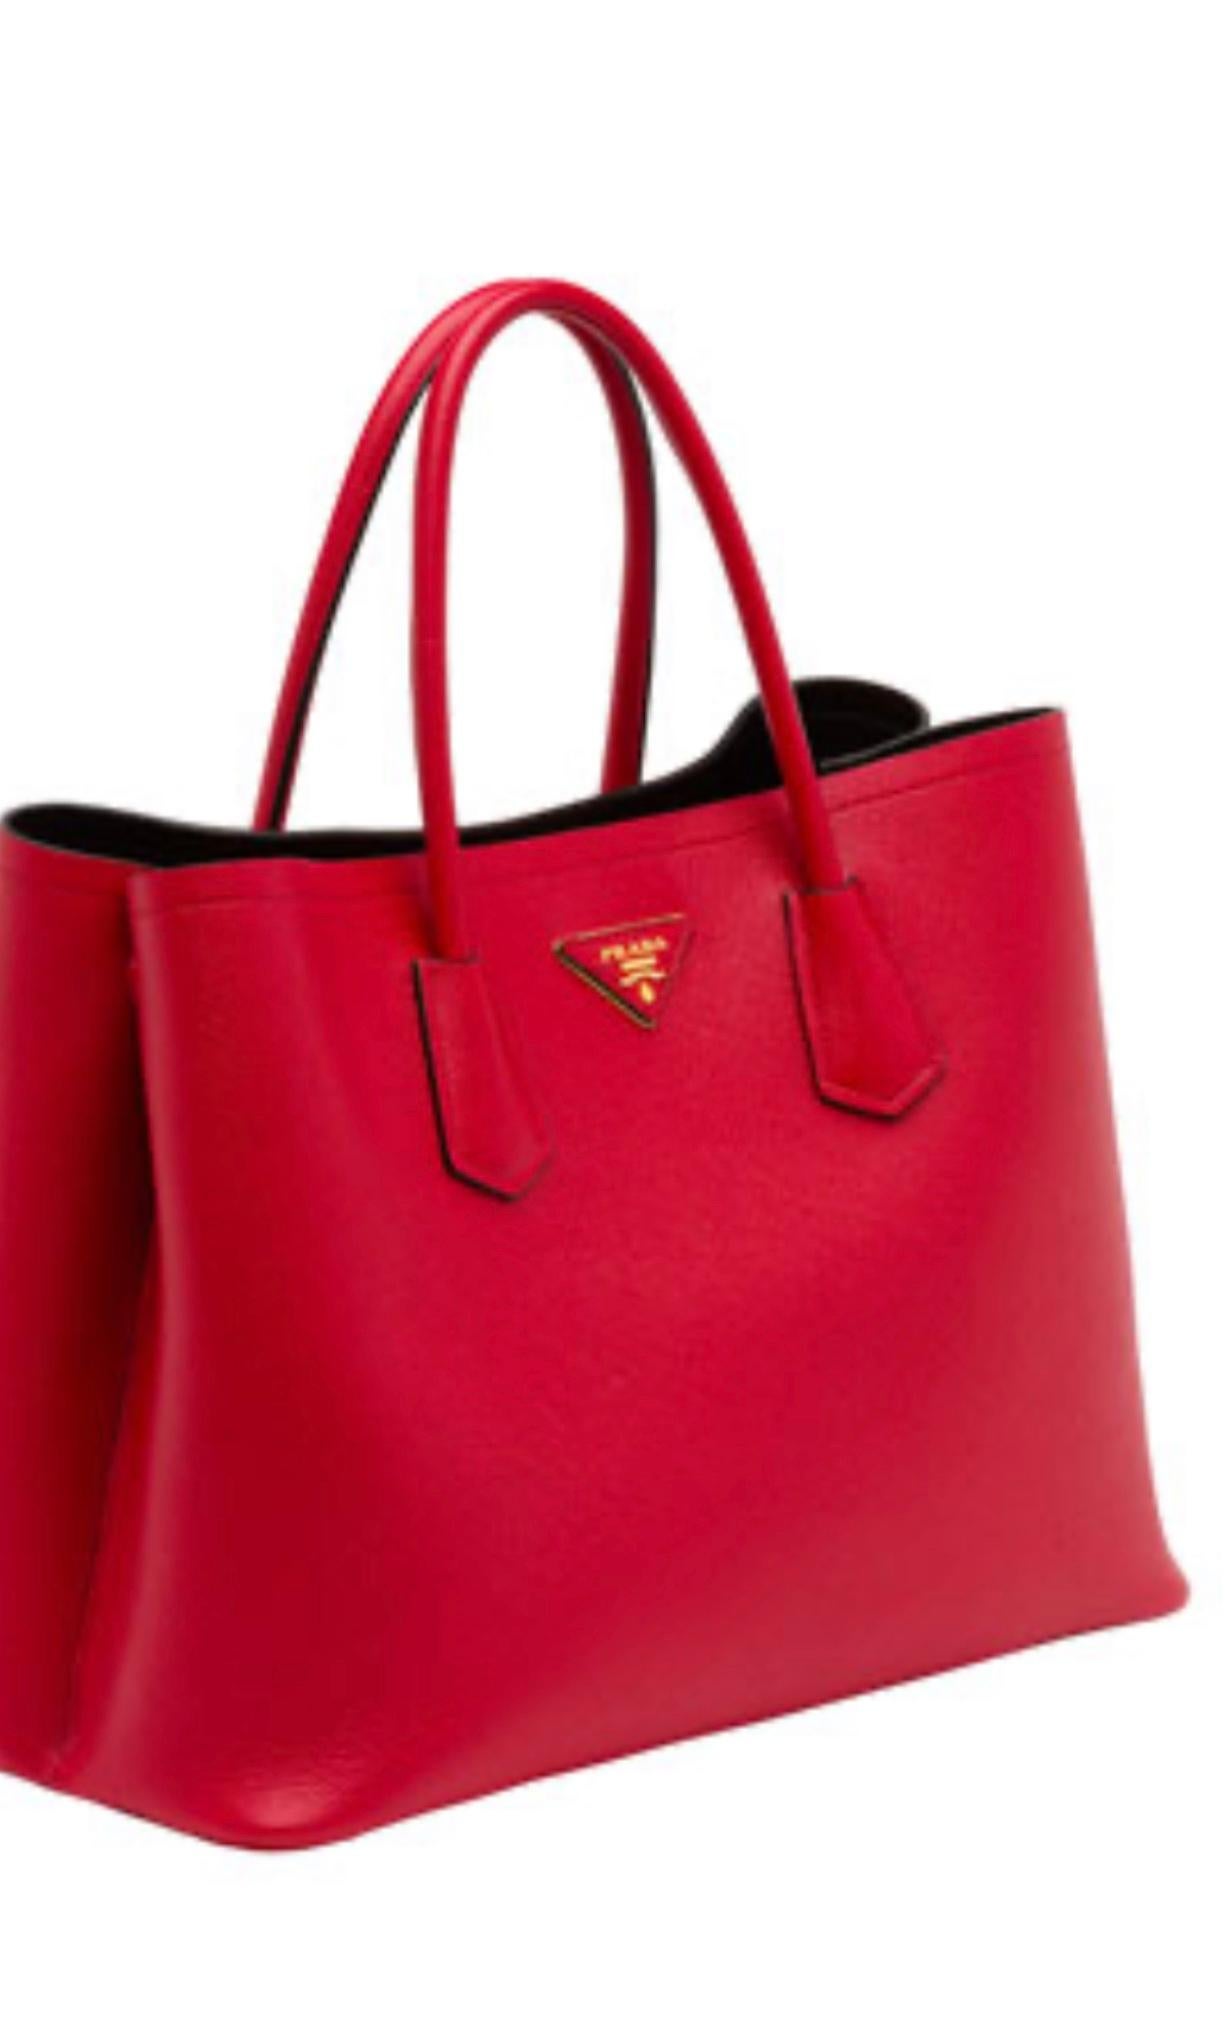 Prada Saffiano Cuir Double Bag, Red (Fuoco), Brand New
Prada saffiano leather tote bag.Prada saffiano leather tote bag.This bold tote is crafted of Prada saffiano crossgrain leather
Golden hardware, tonal top stitching.
Rolled top handles with strap